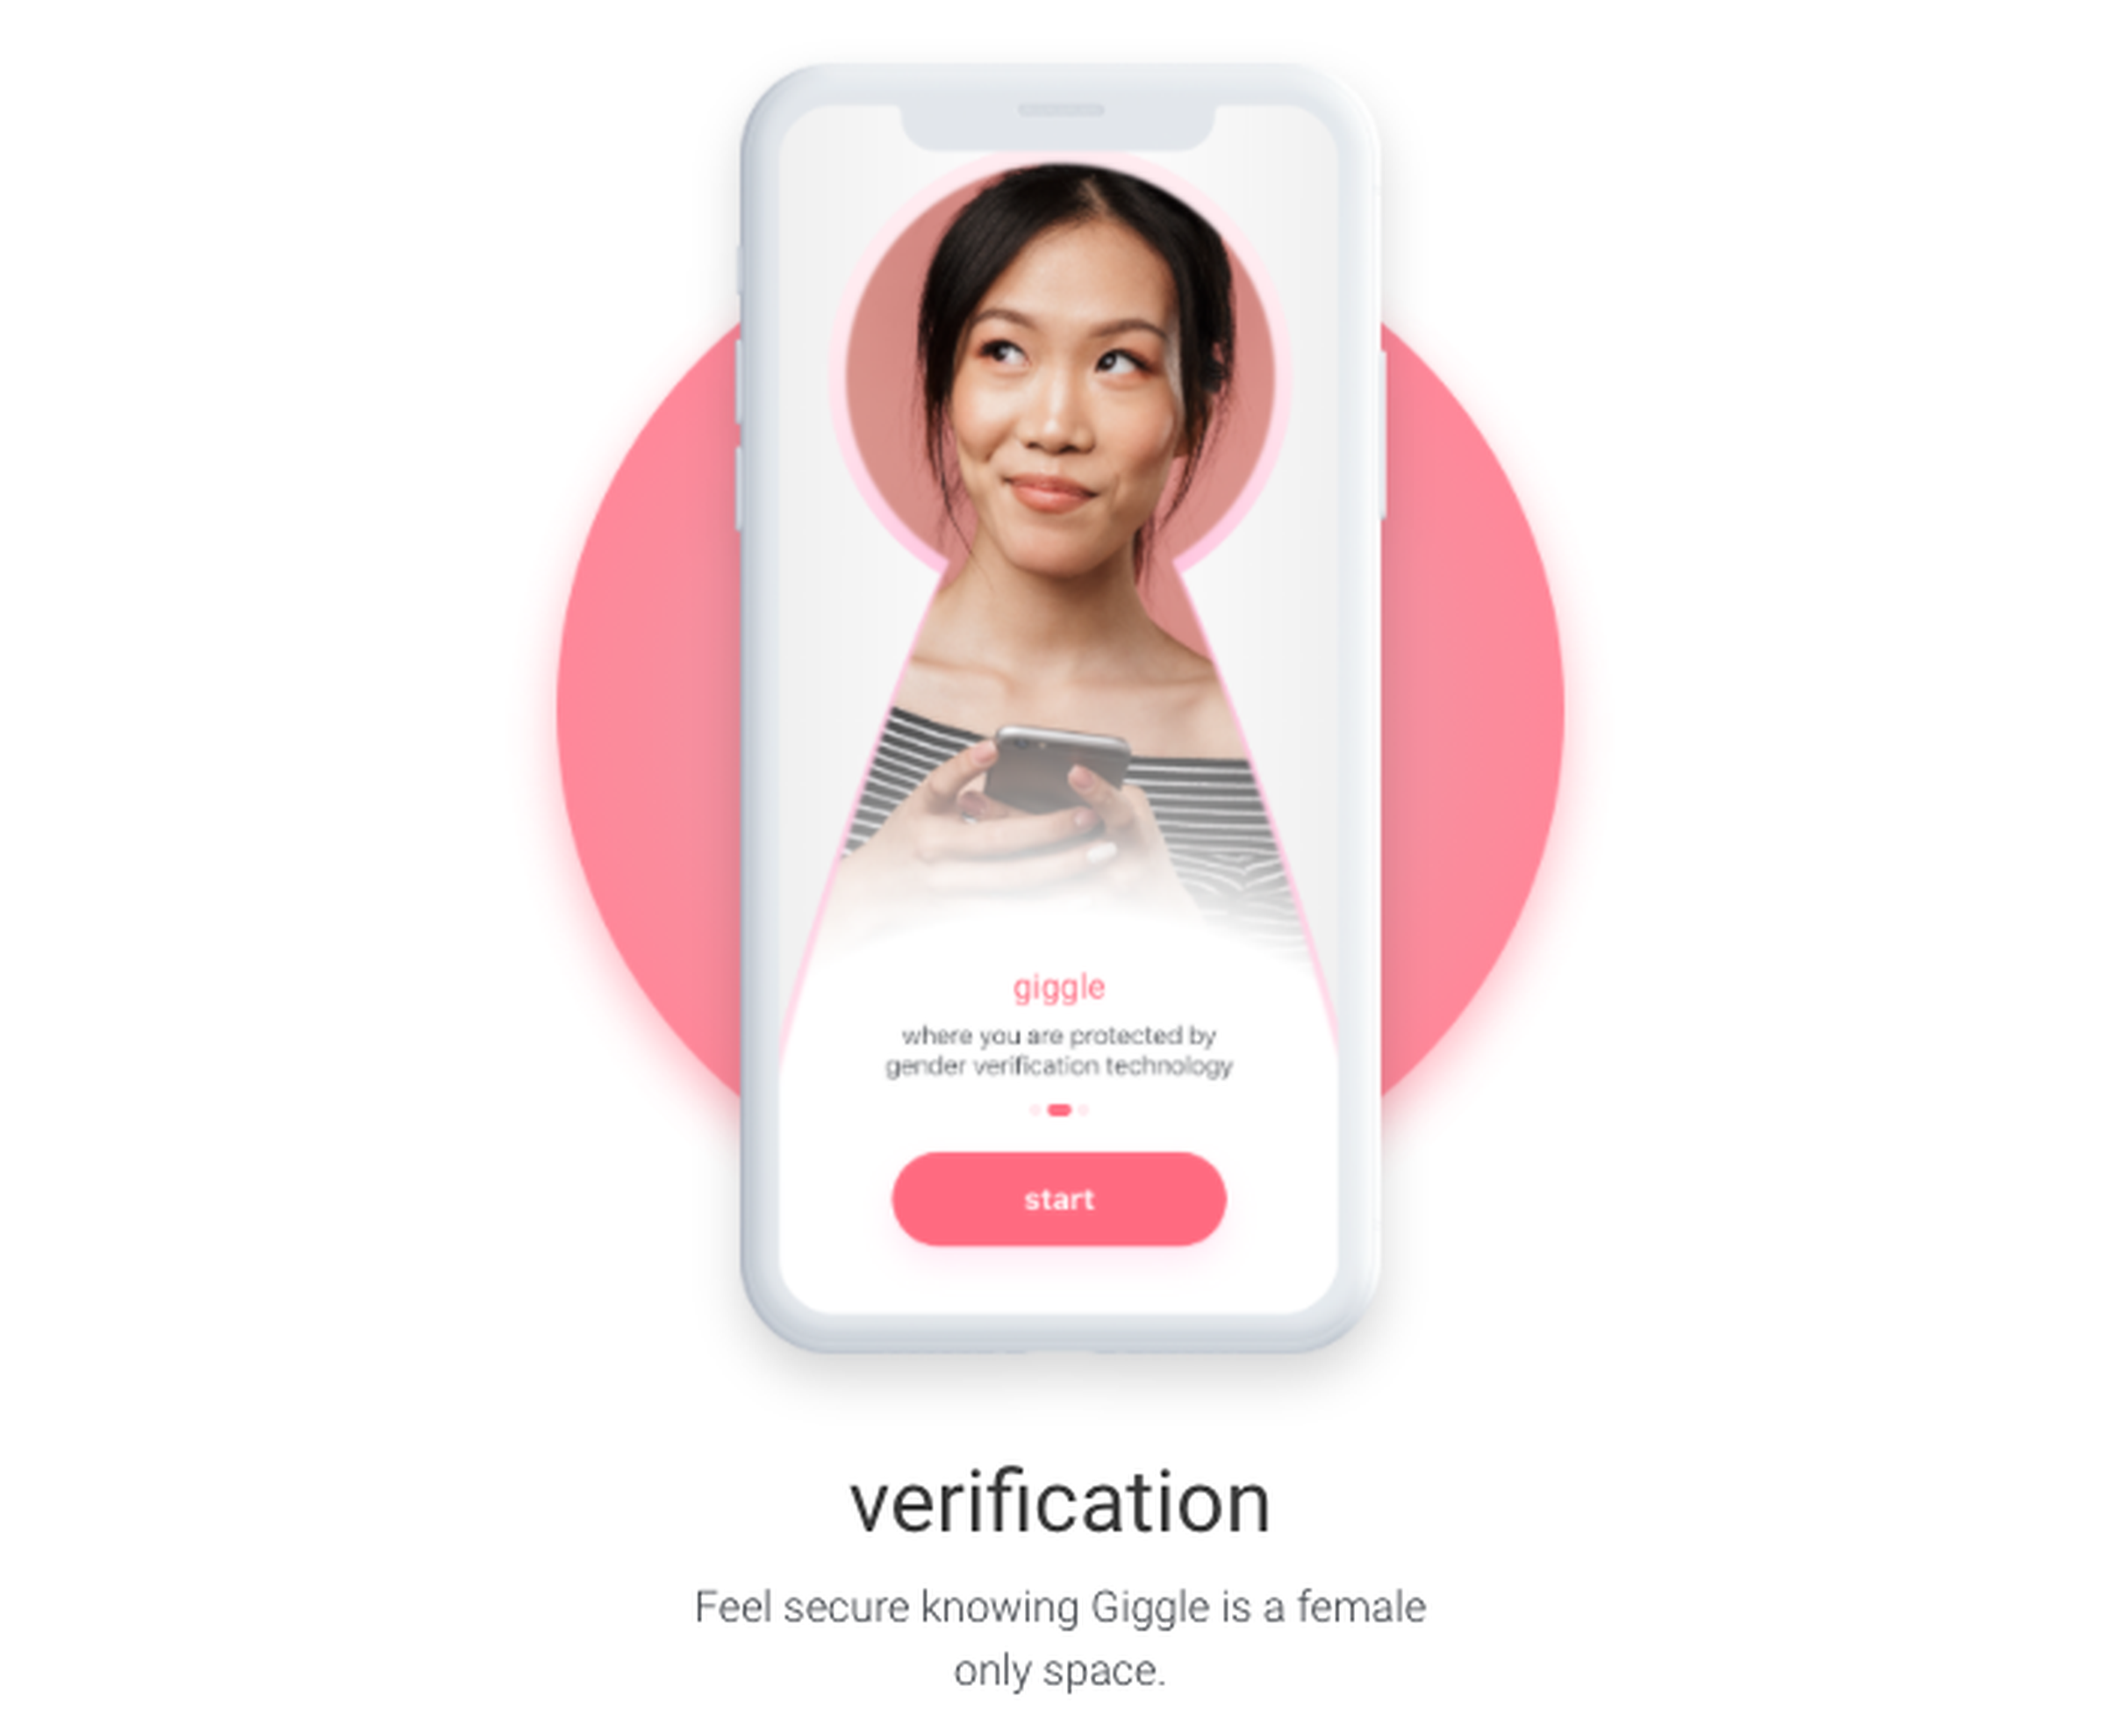 Giggle is a “girls-only” social app that attempts to verify that users are female using selfies. 